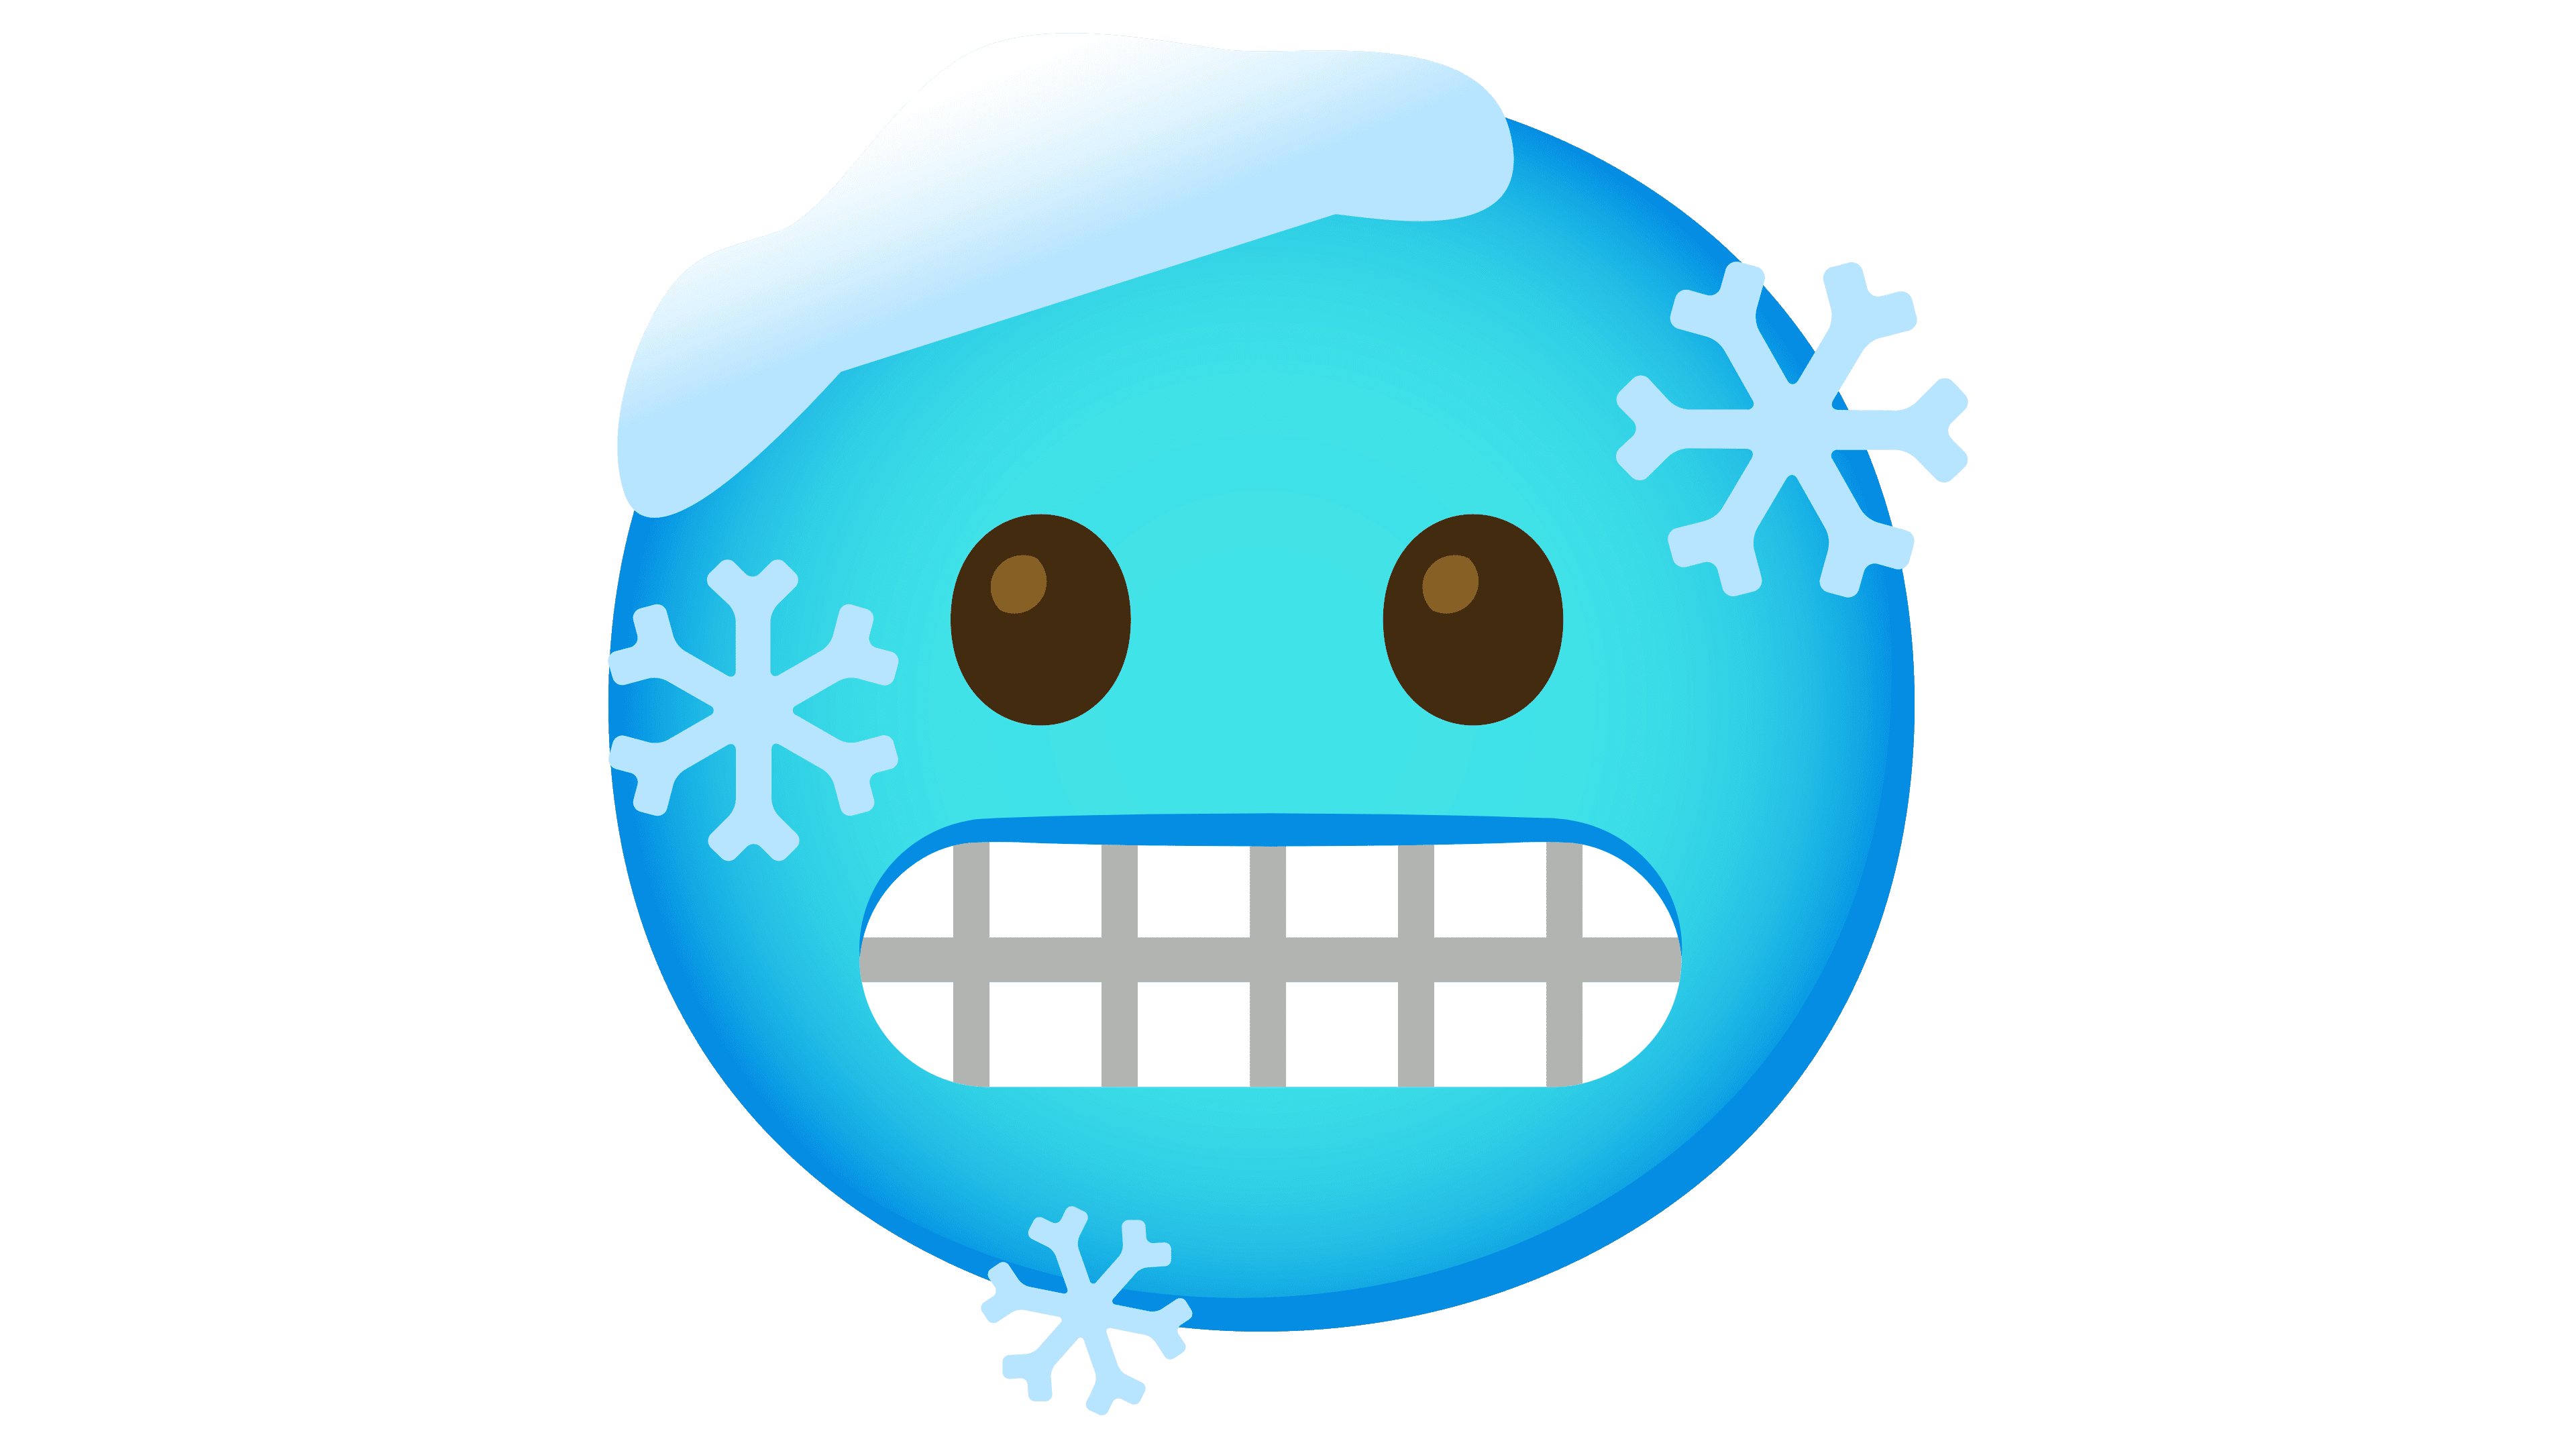 Cold Emoji - what it means and how to use it